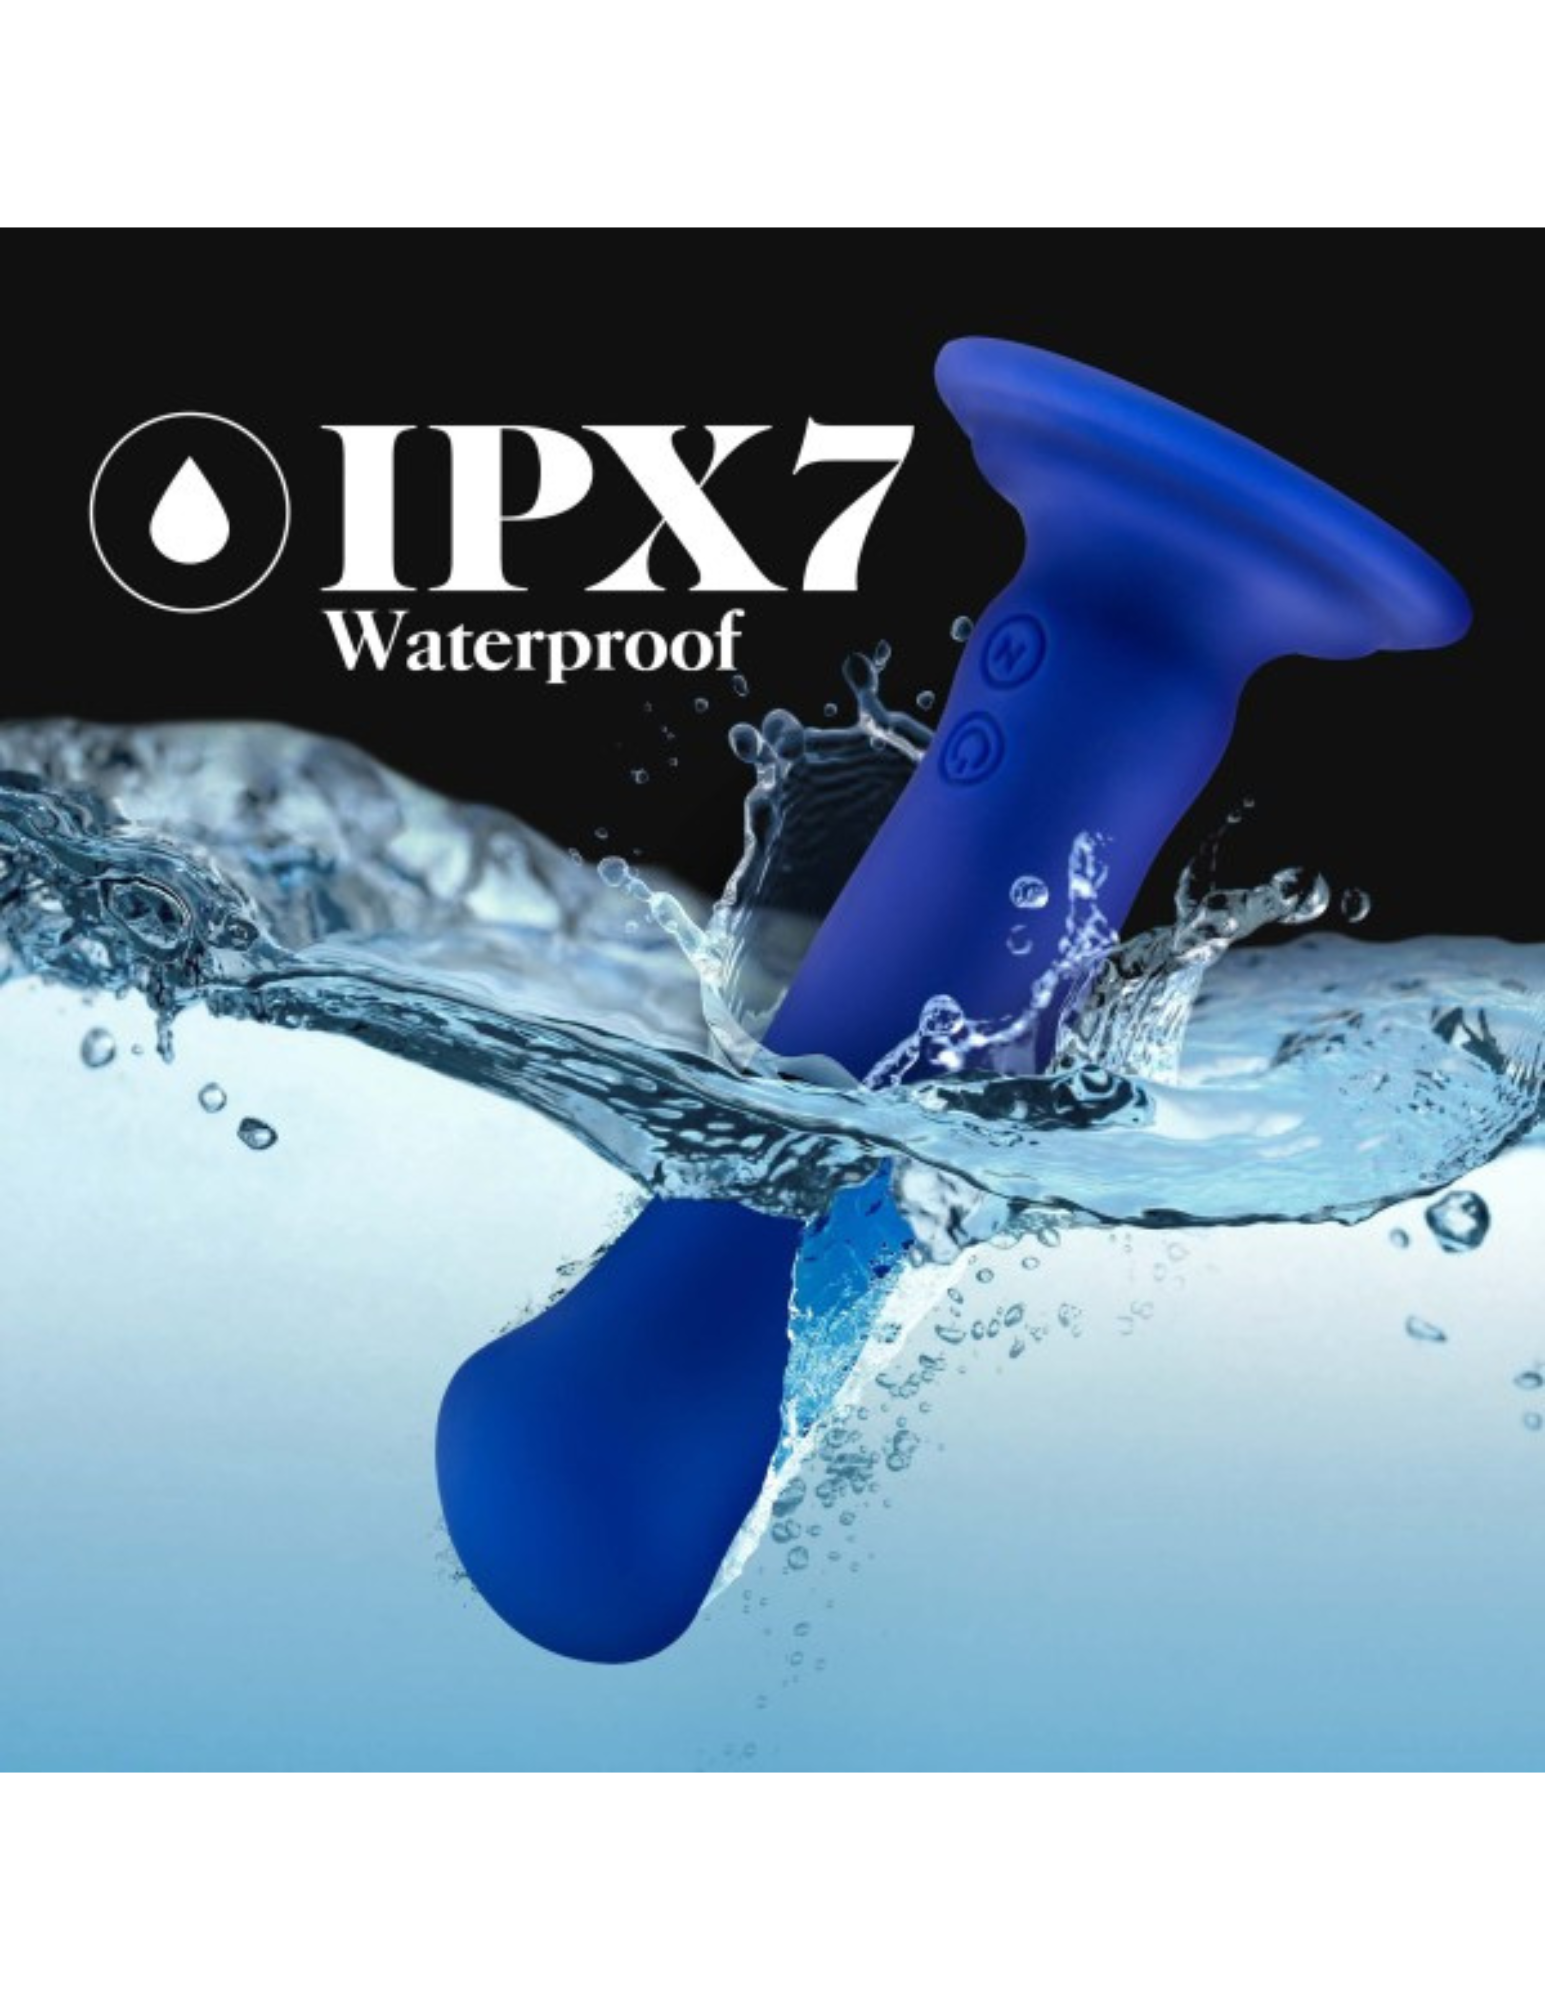 Photo shows the waterproof design of the Impressions Santorini Vibrator from Blush (blue).